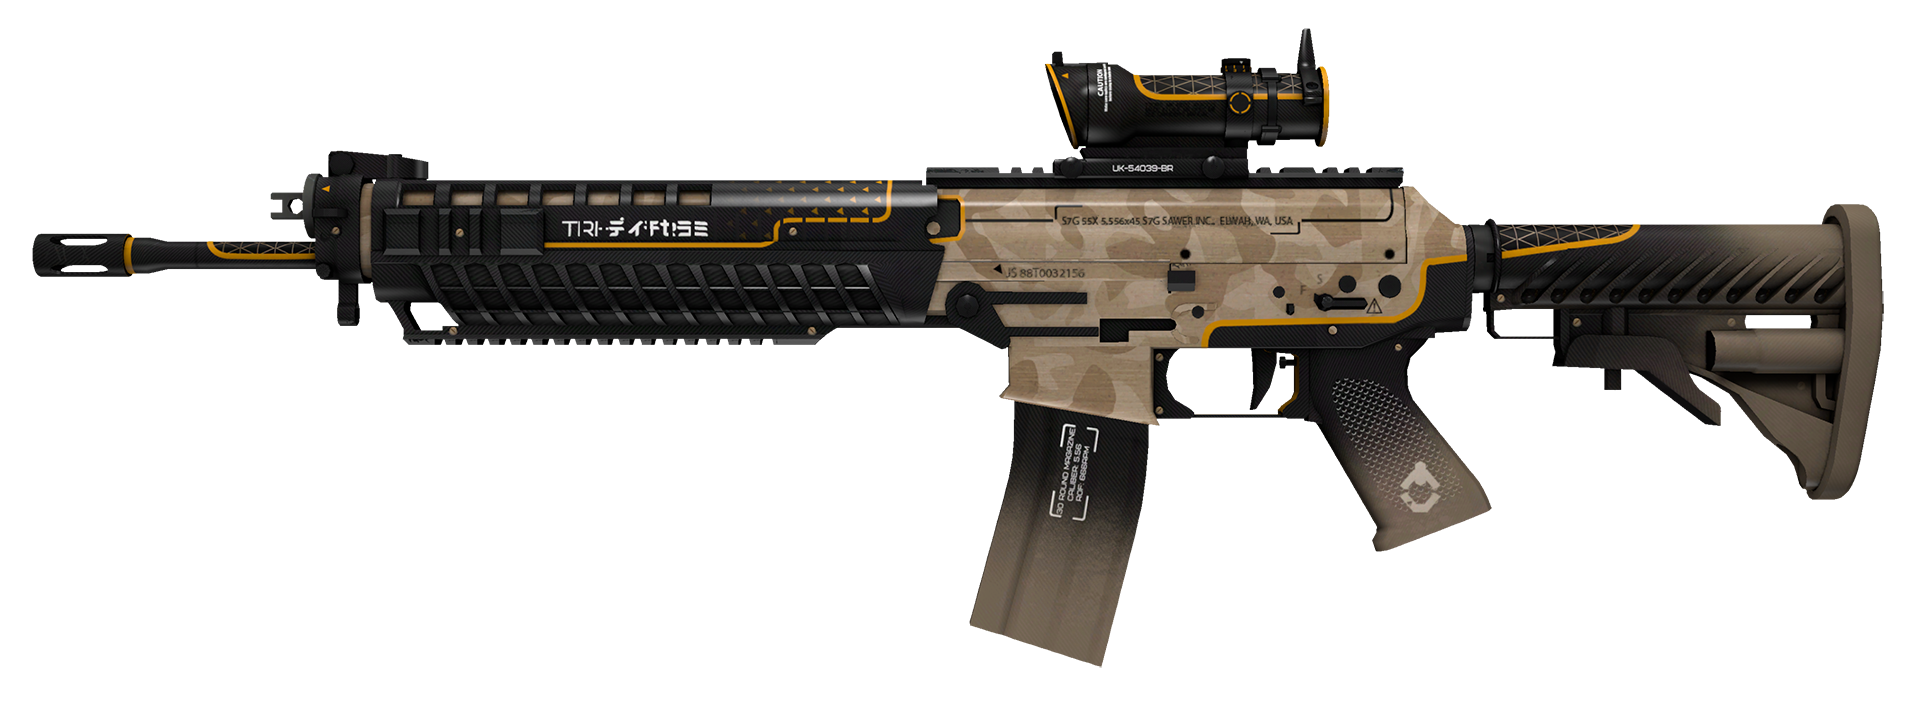 SG 553 Aerial cs go skin download the new version for iphone